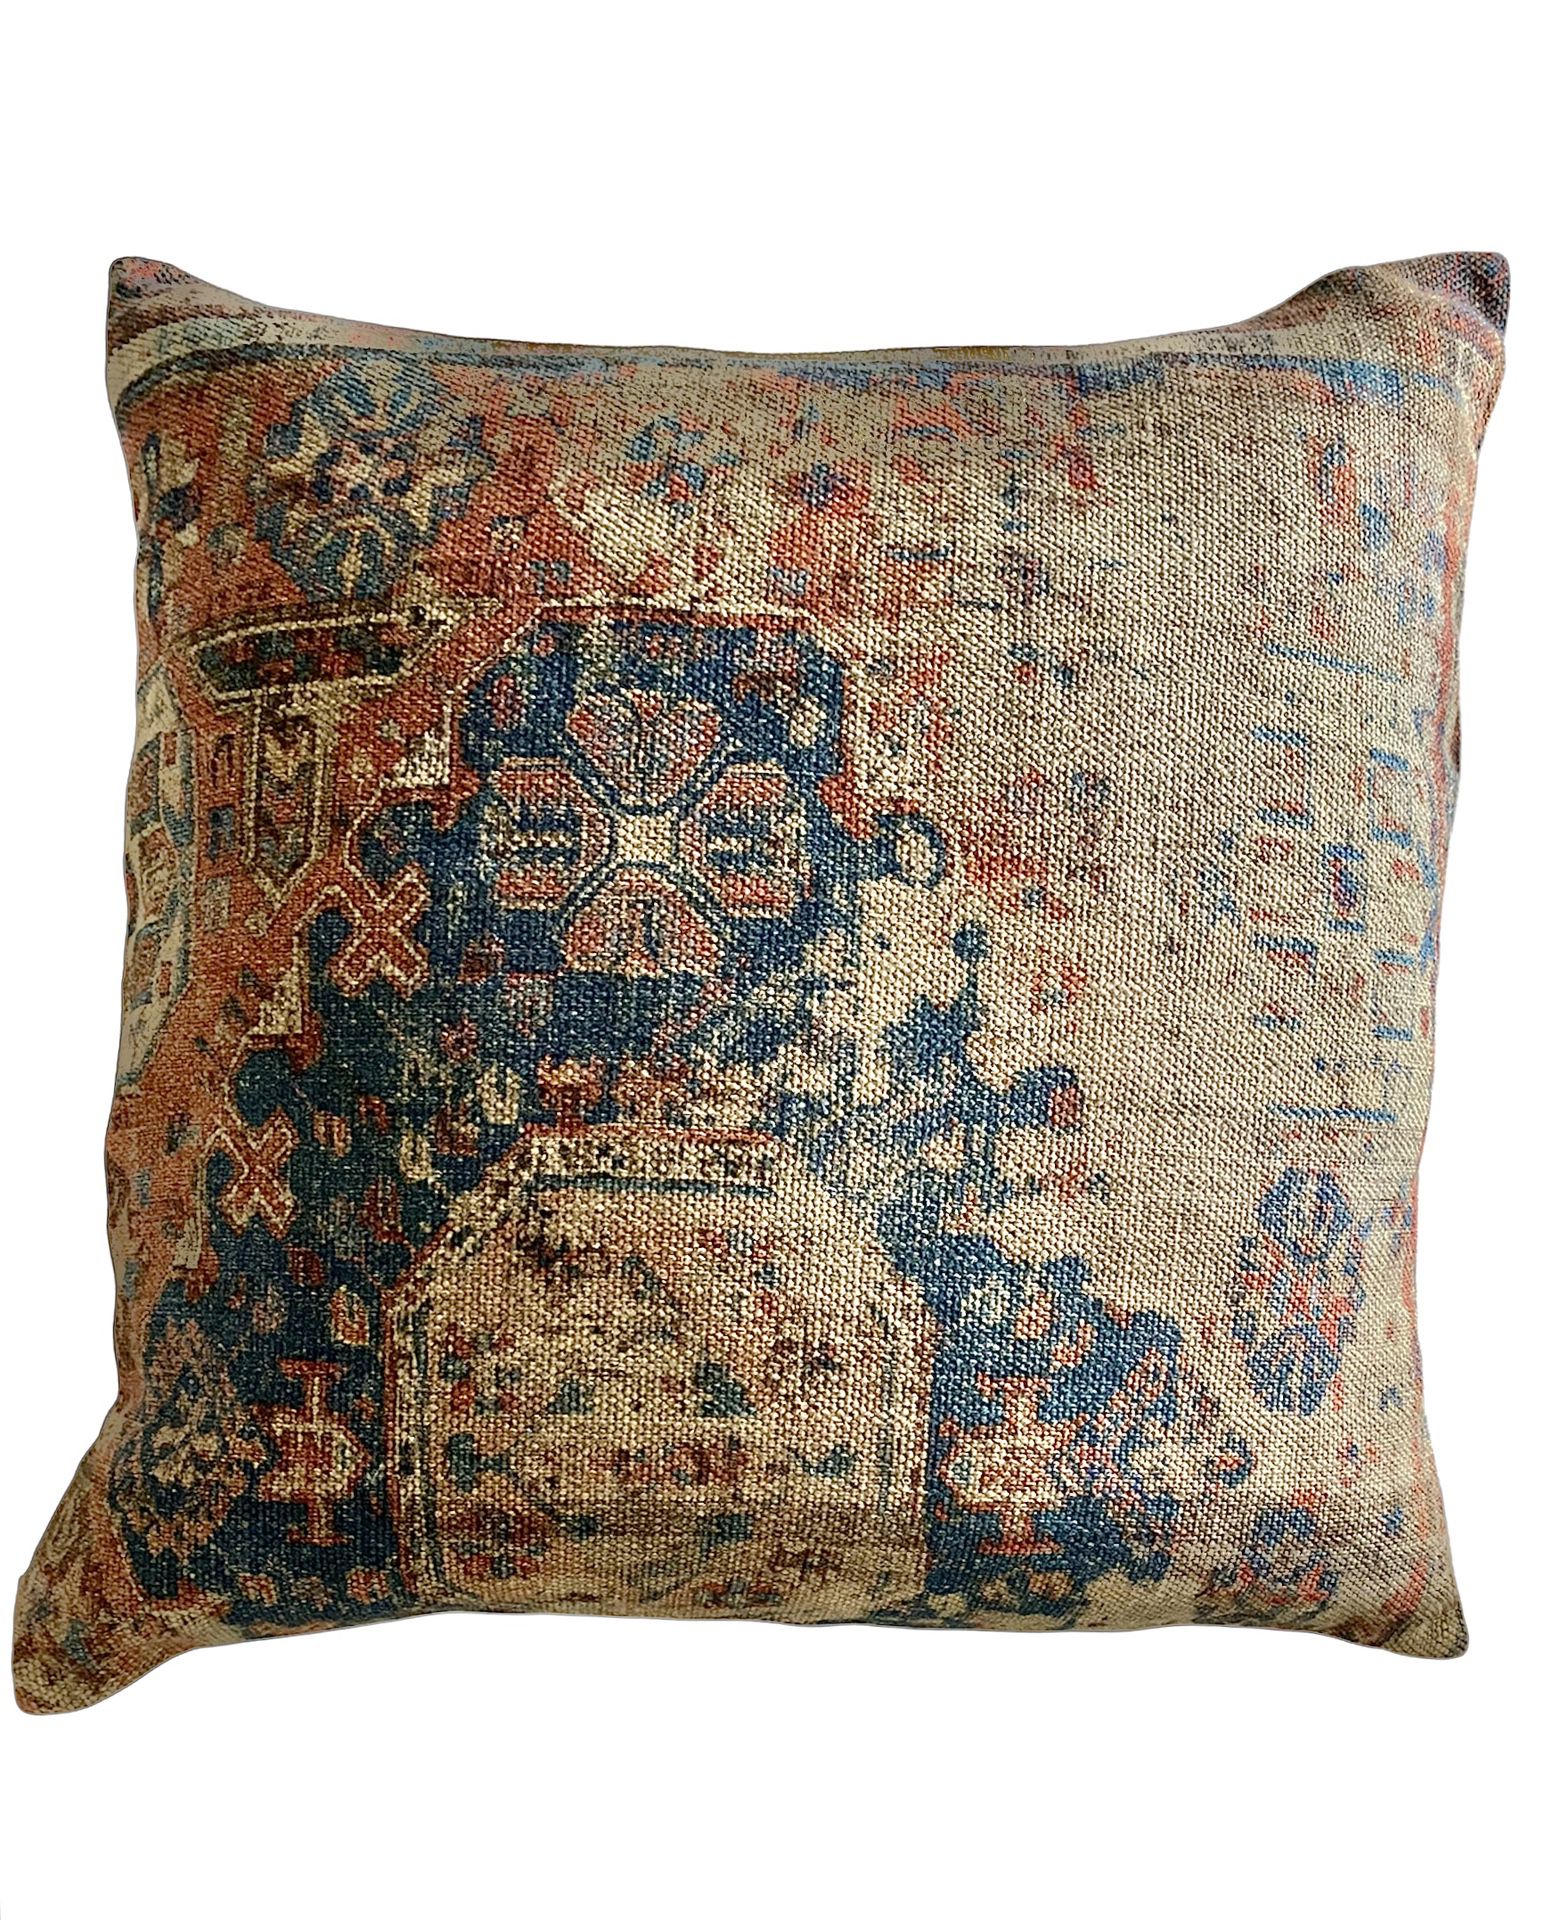 Pottery Barn Pillow Cover 22X22